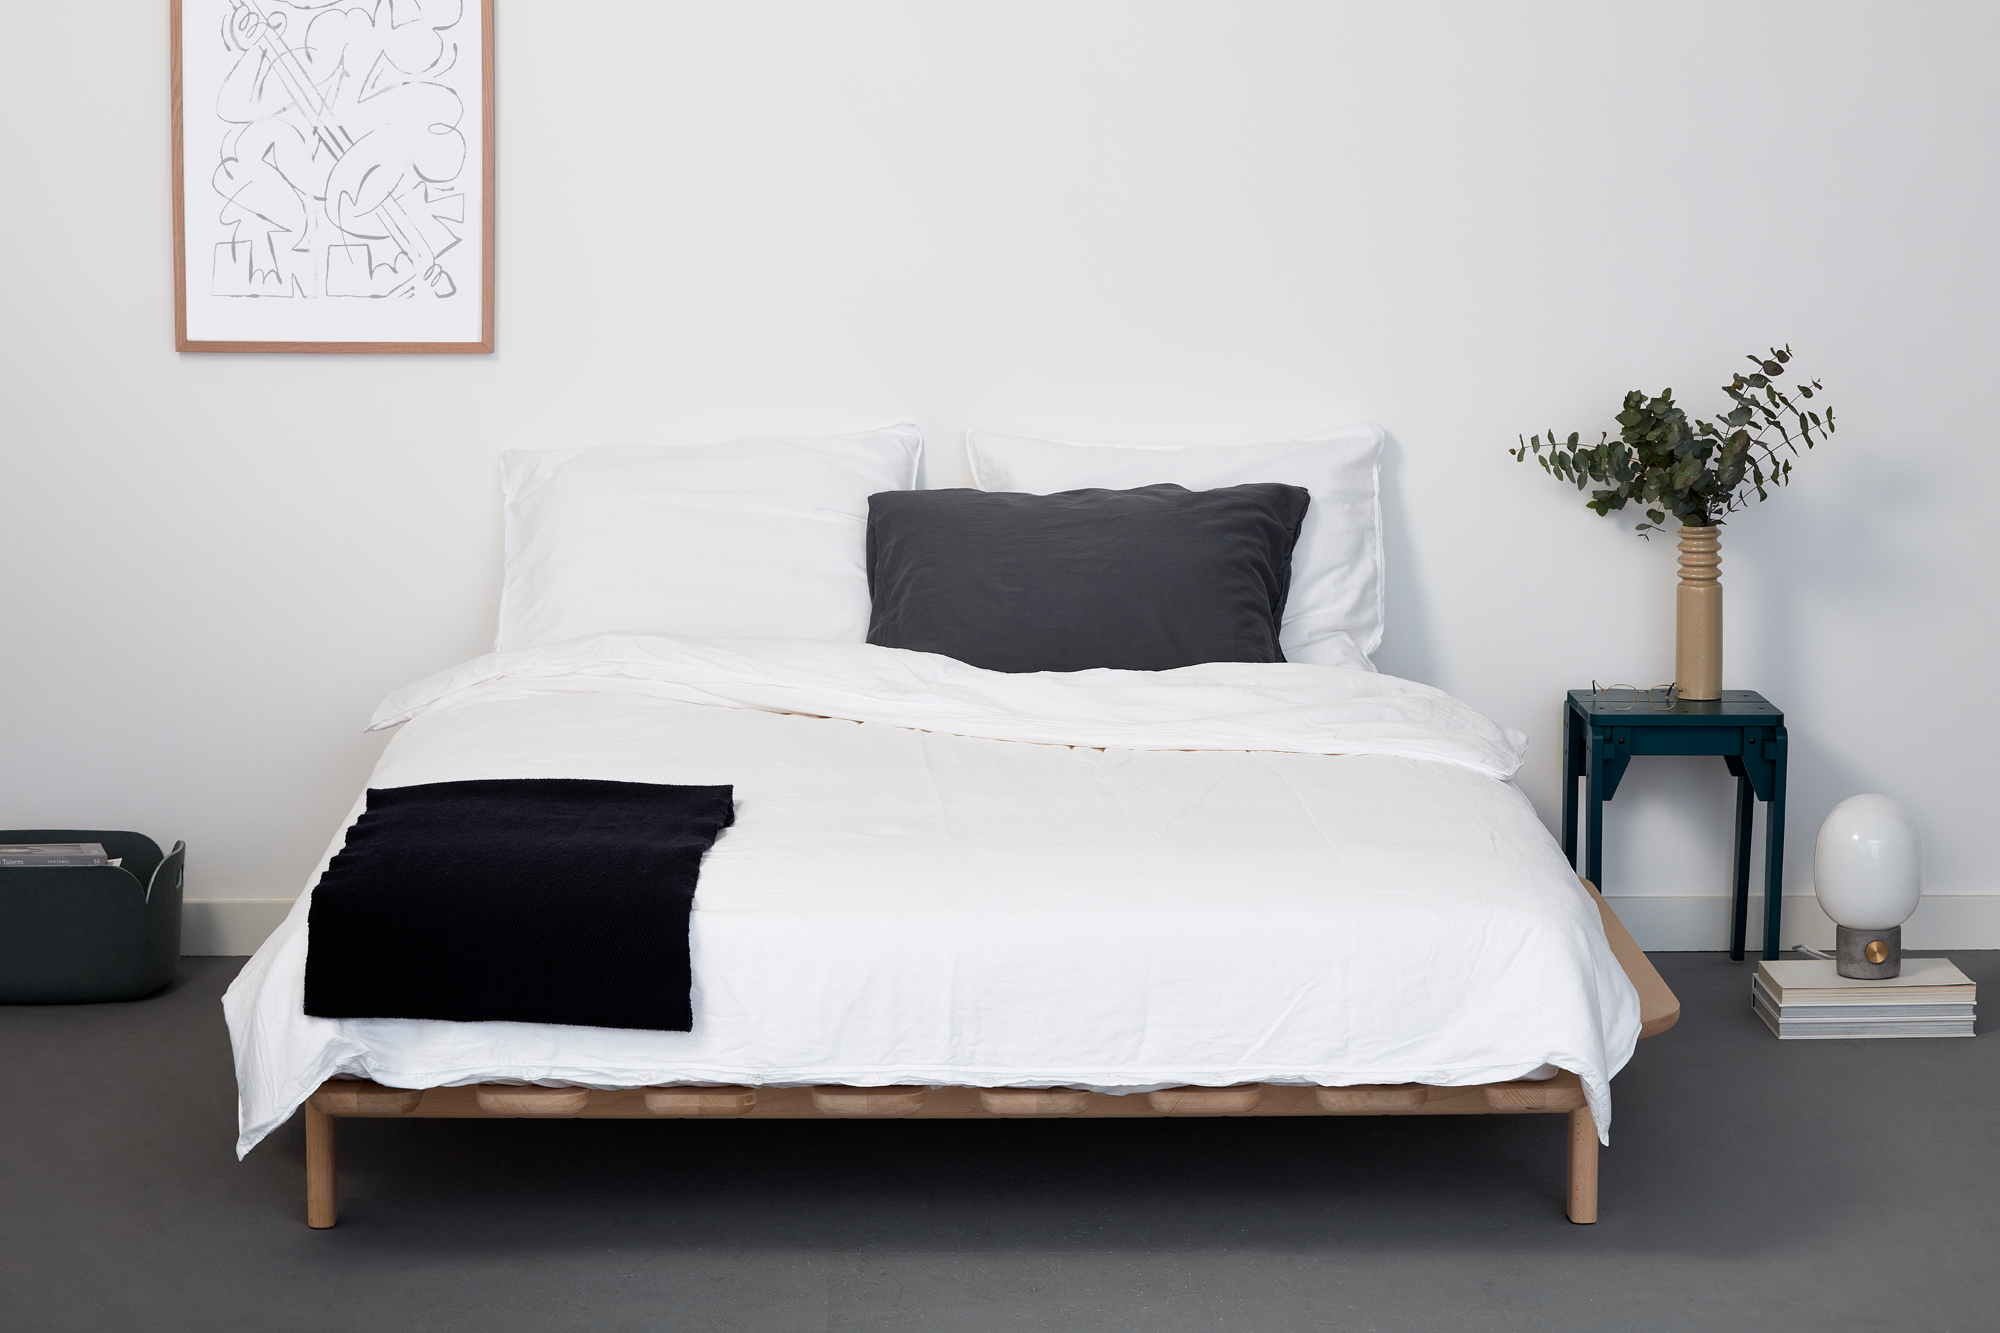 Modest Bed by Justin Jorissen for Loof